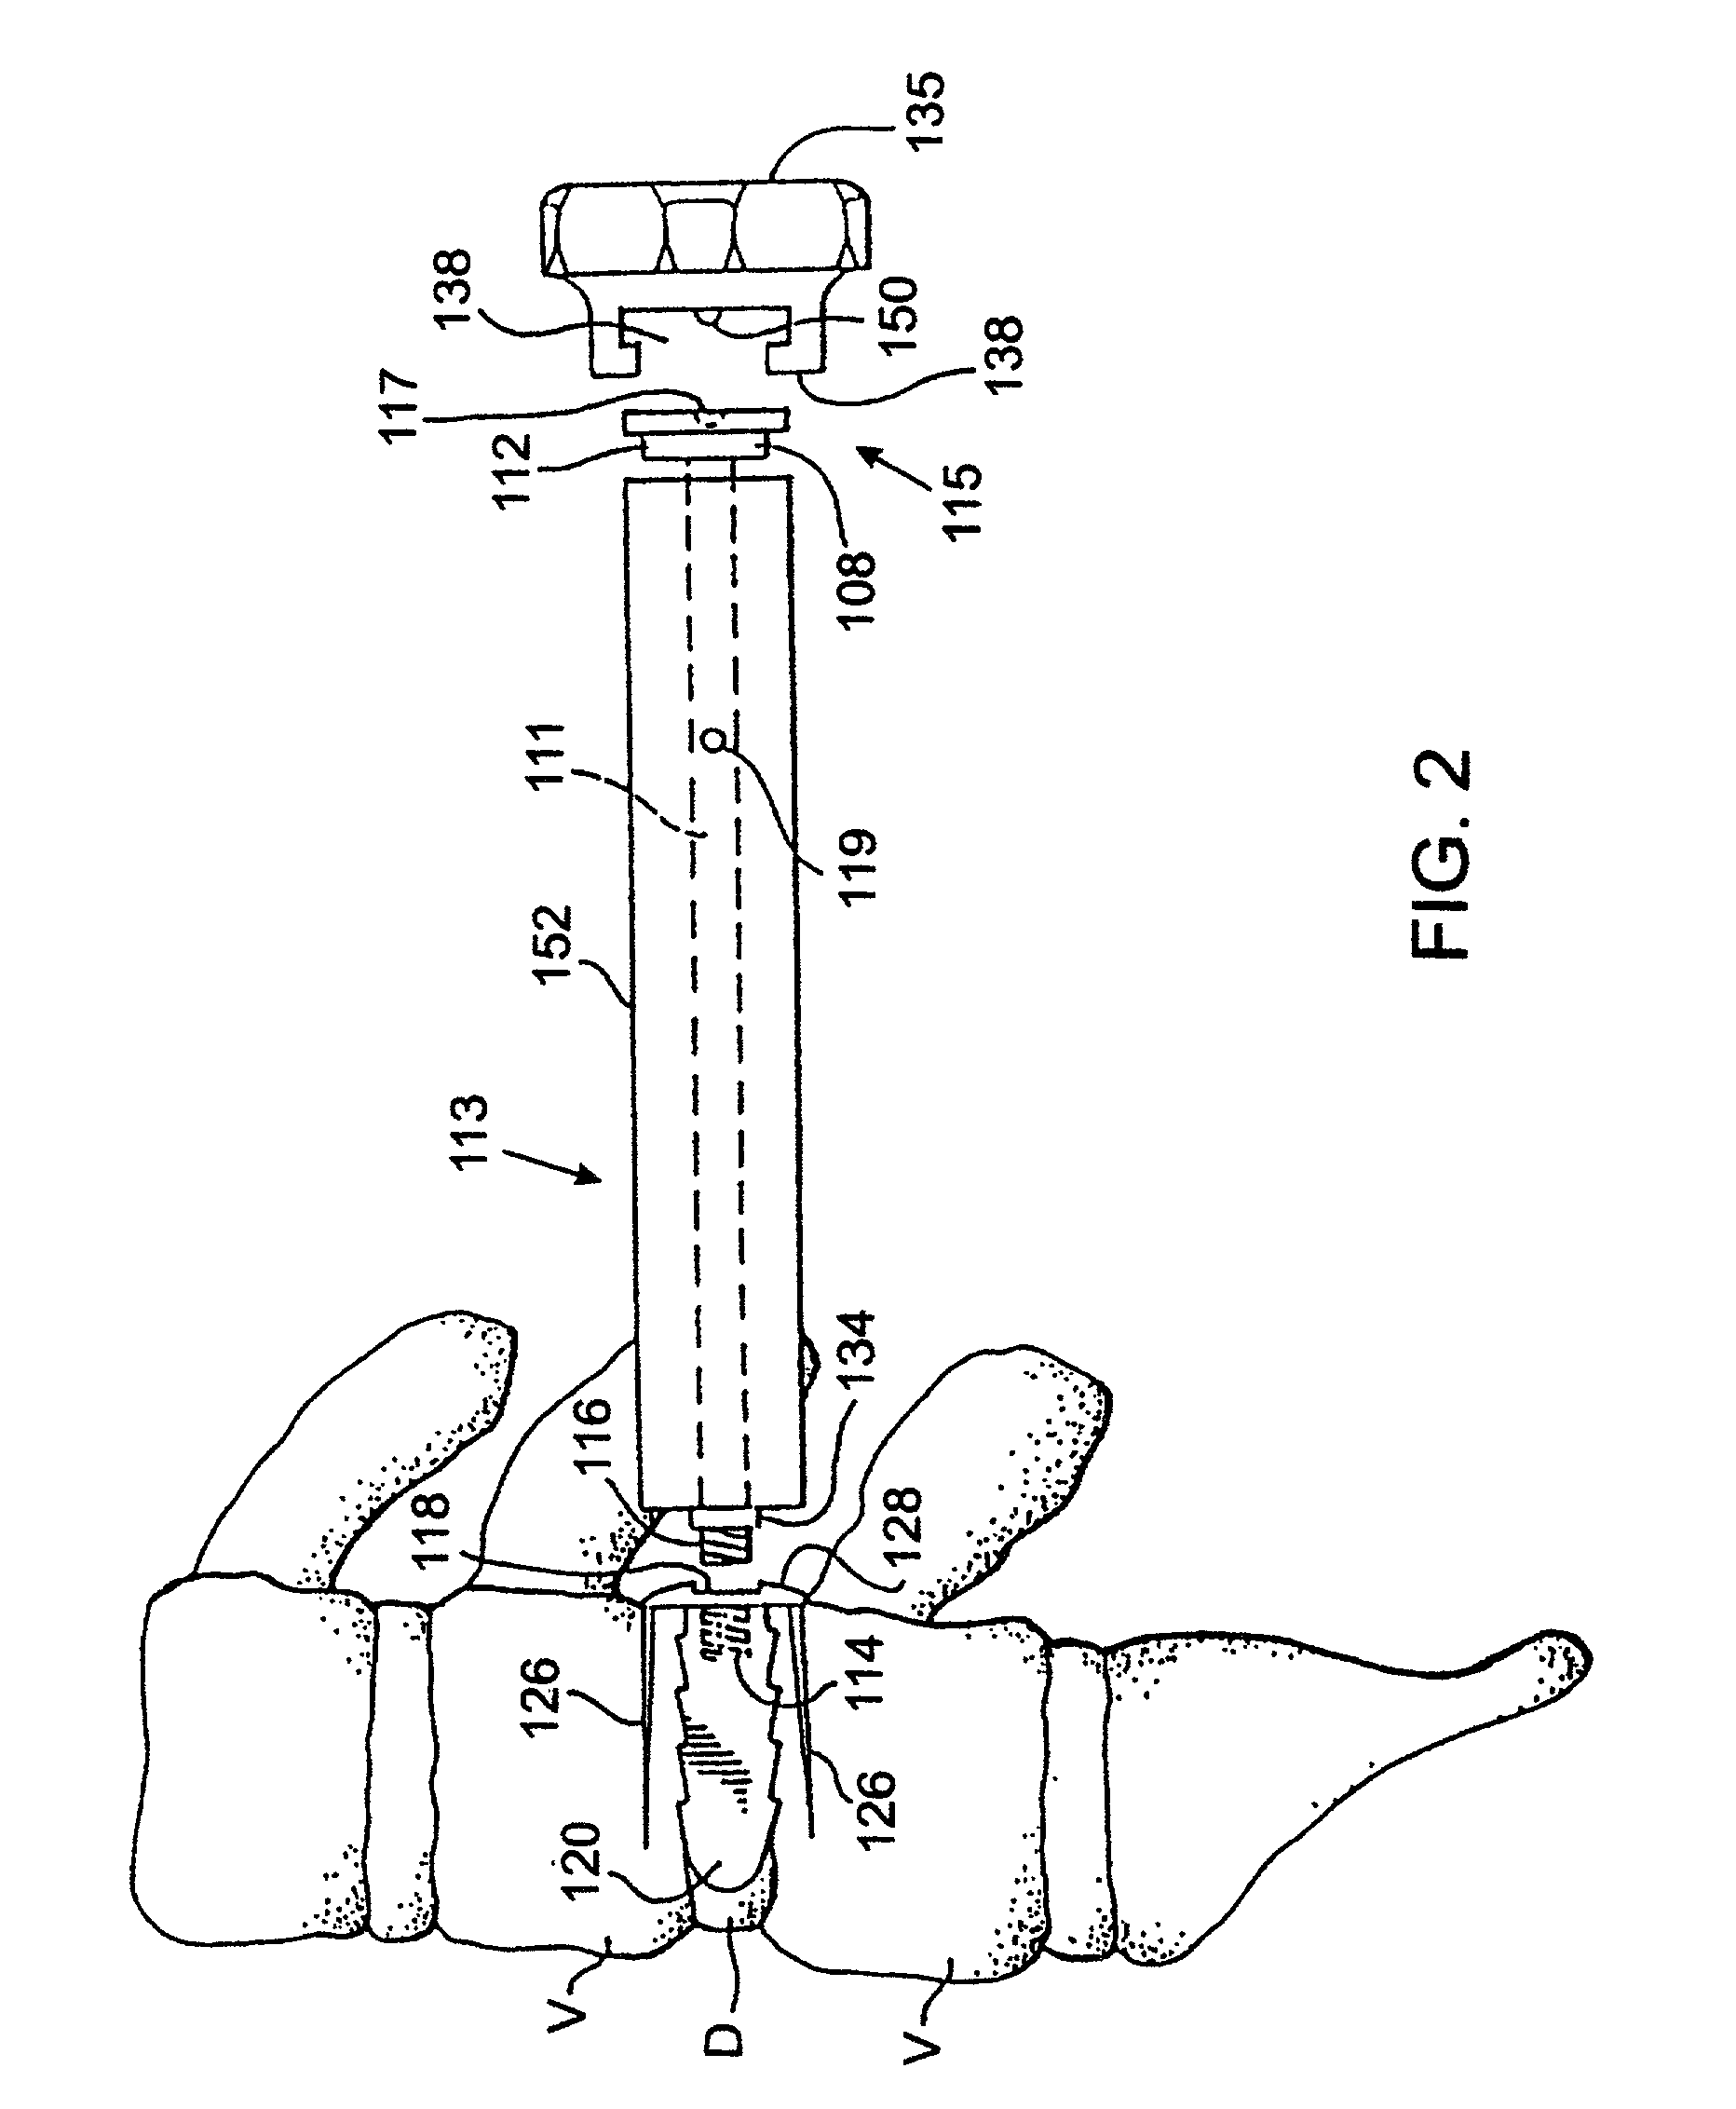 Apparatus and method of inserting spinal implants